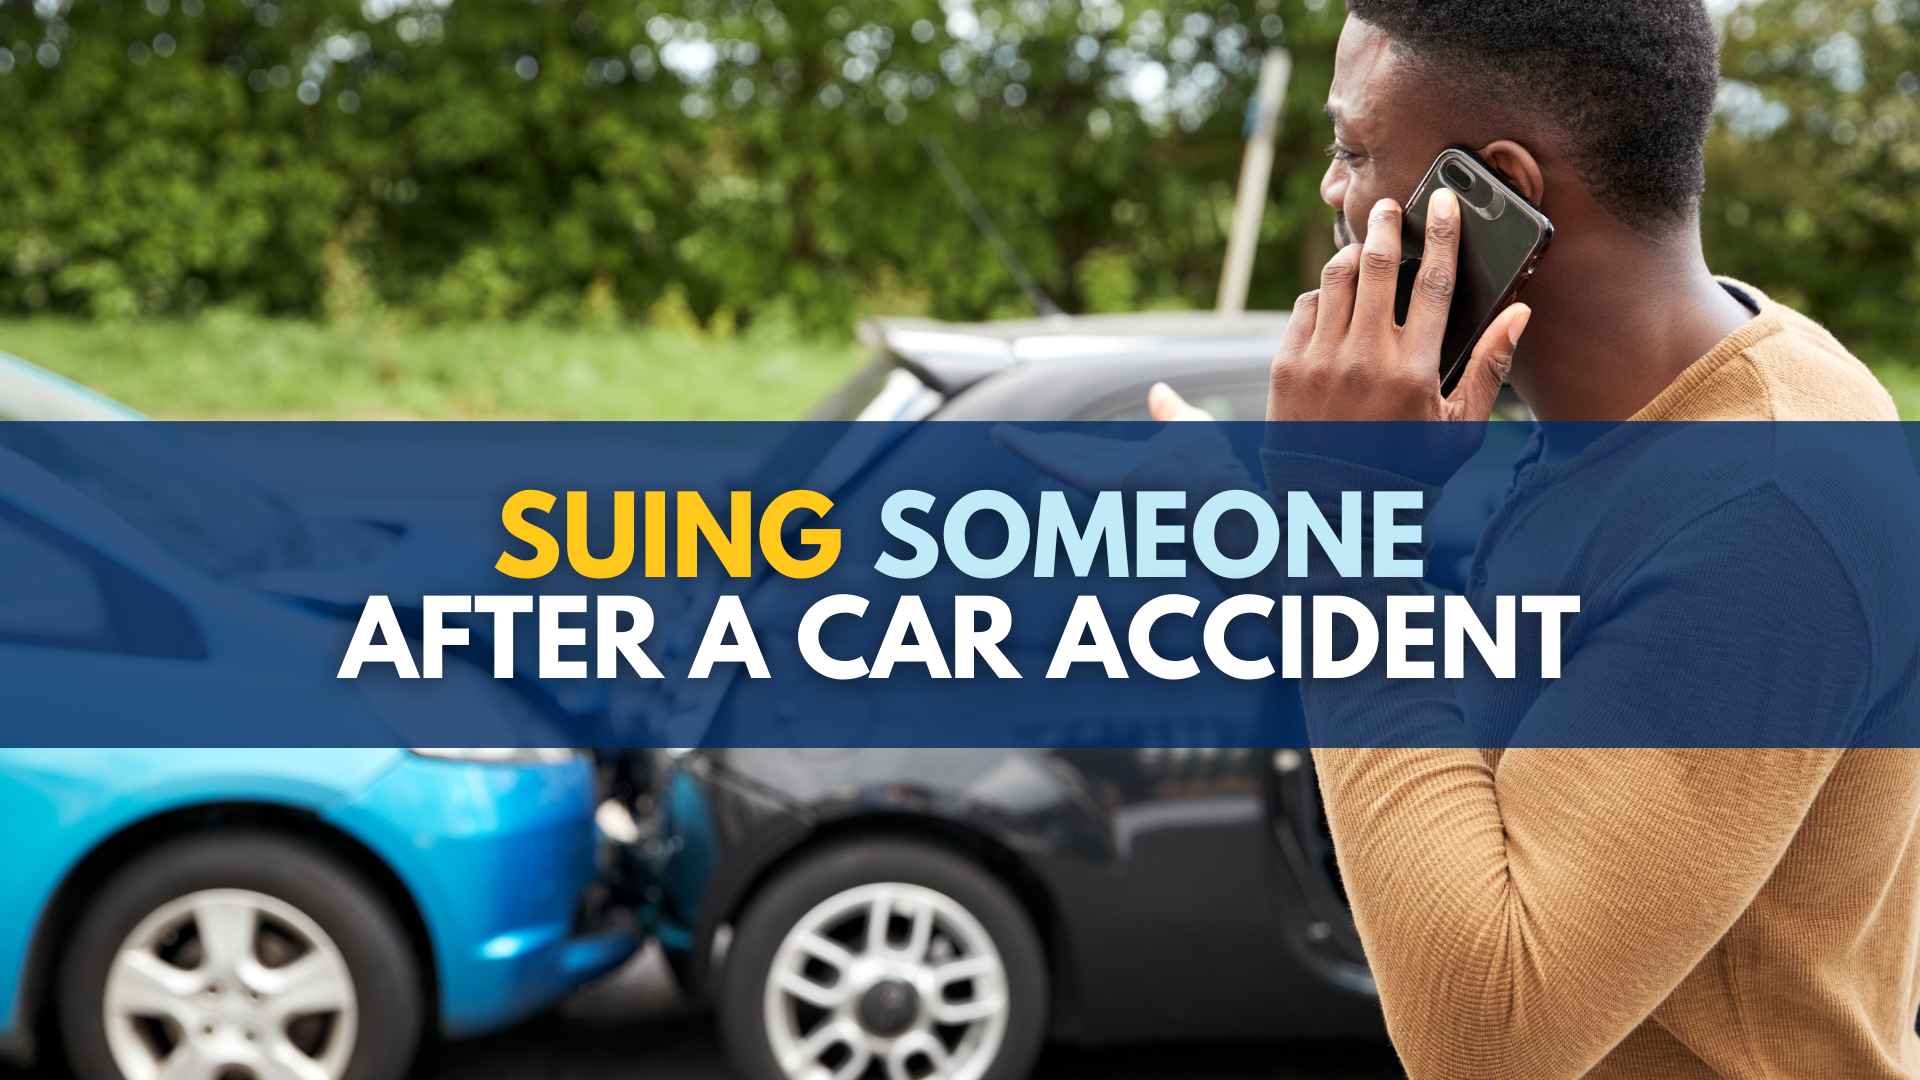 Suing someone after a car accident in Michigan